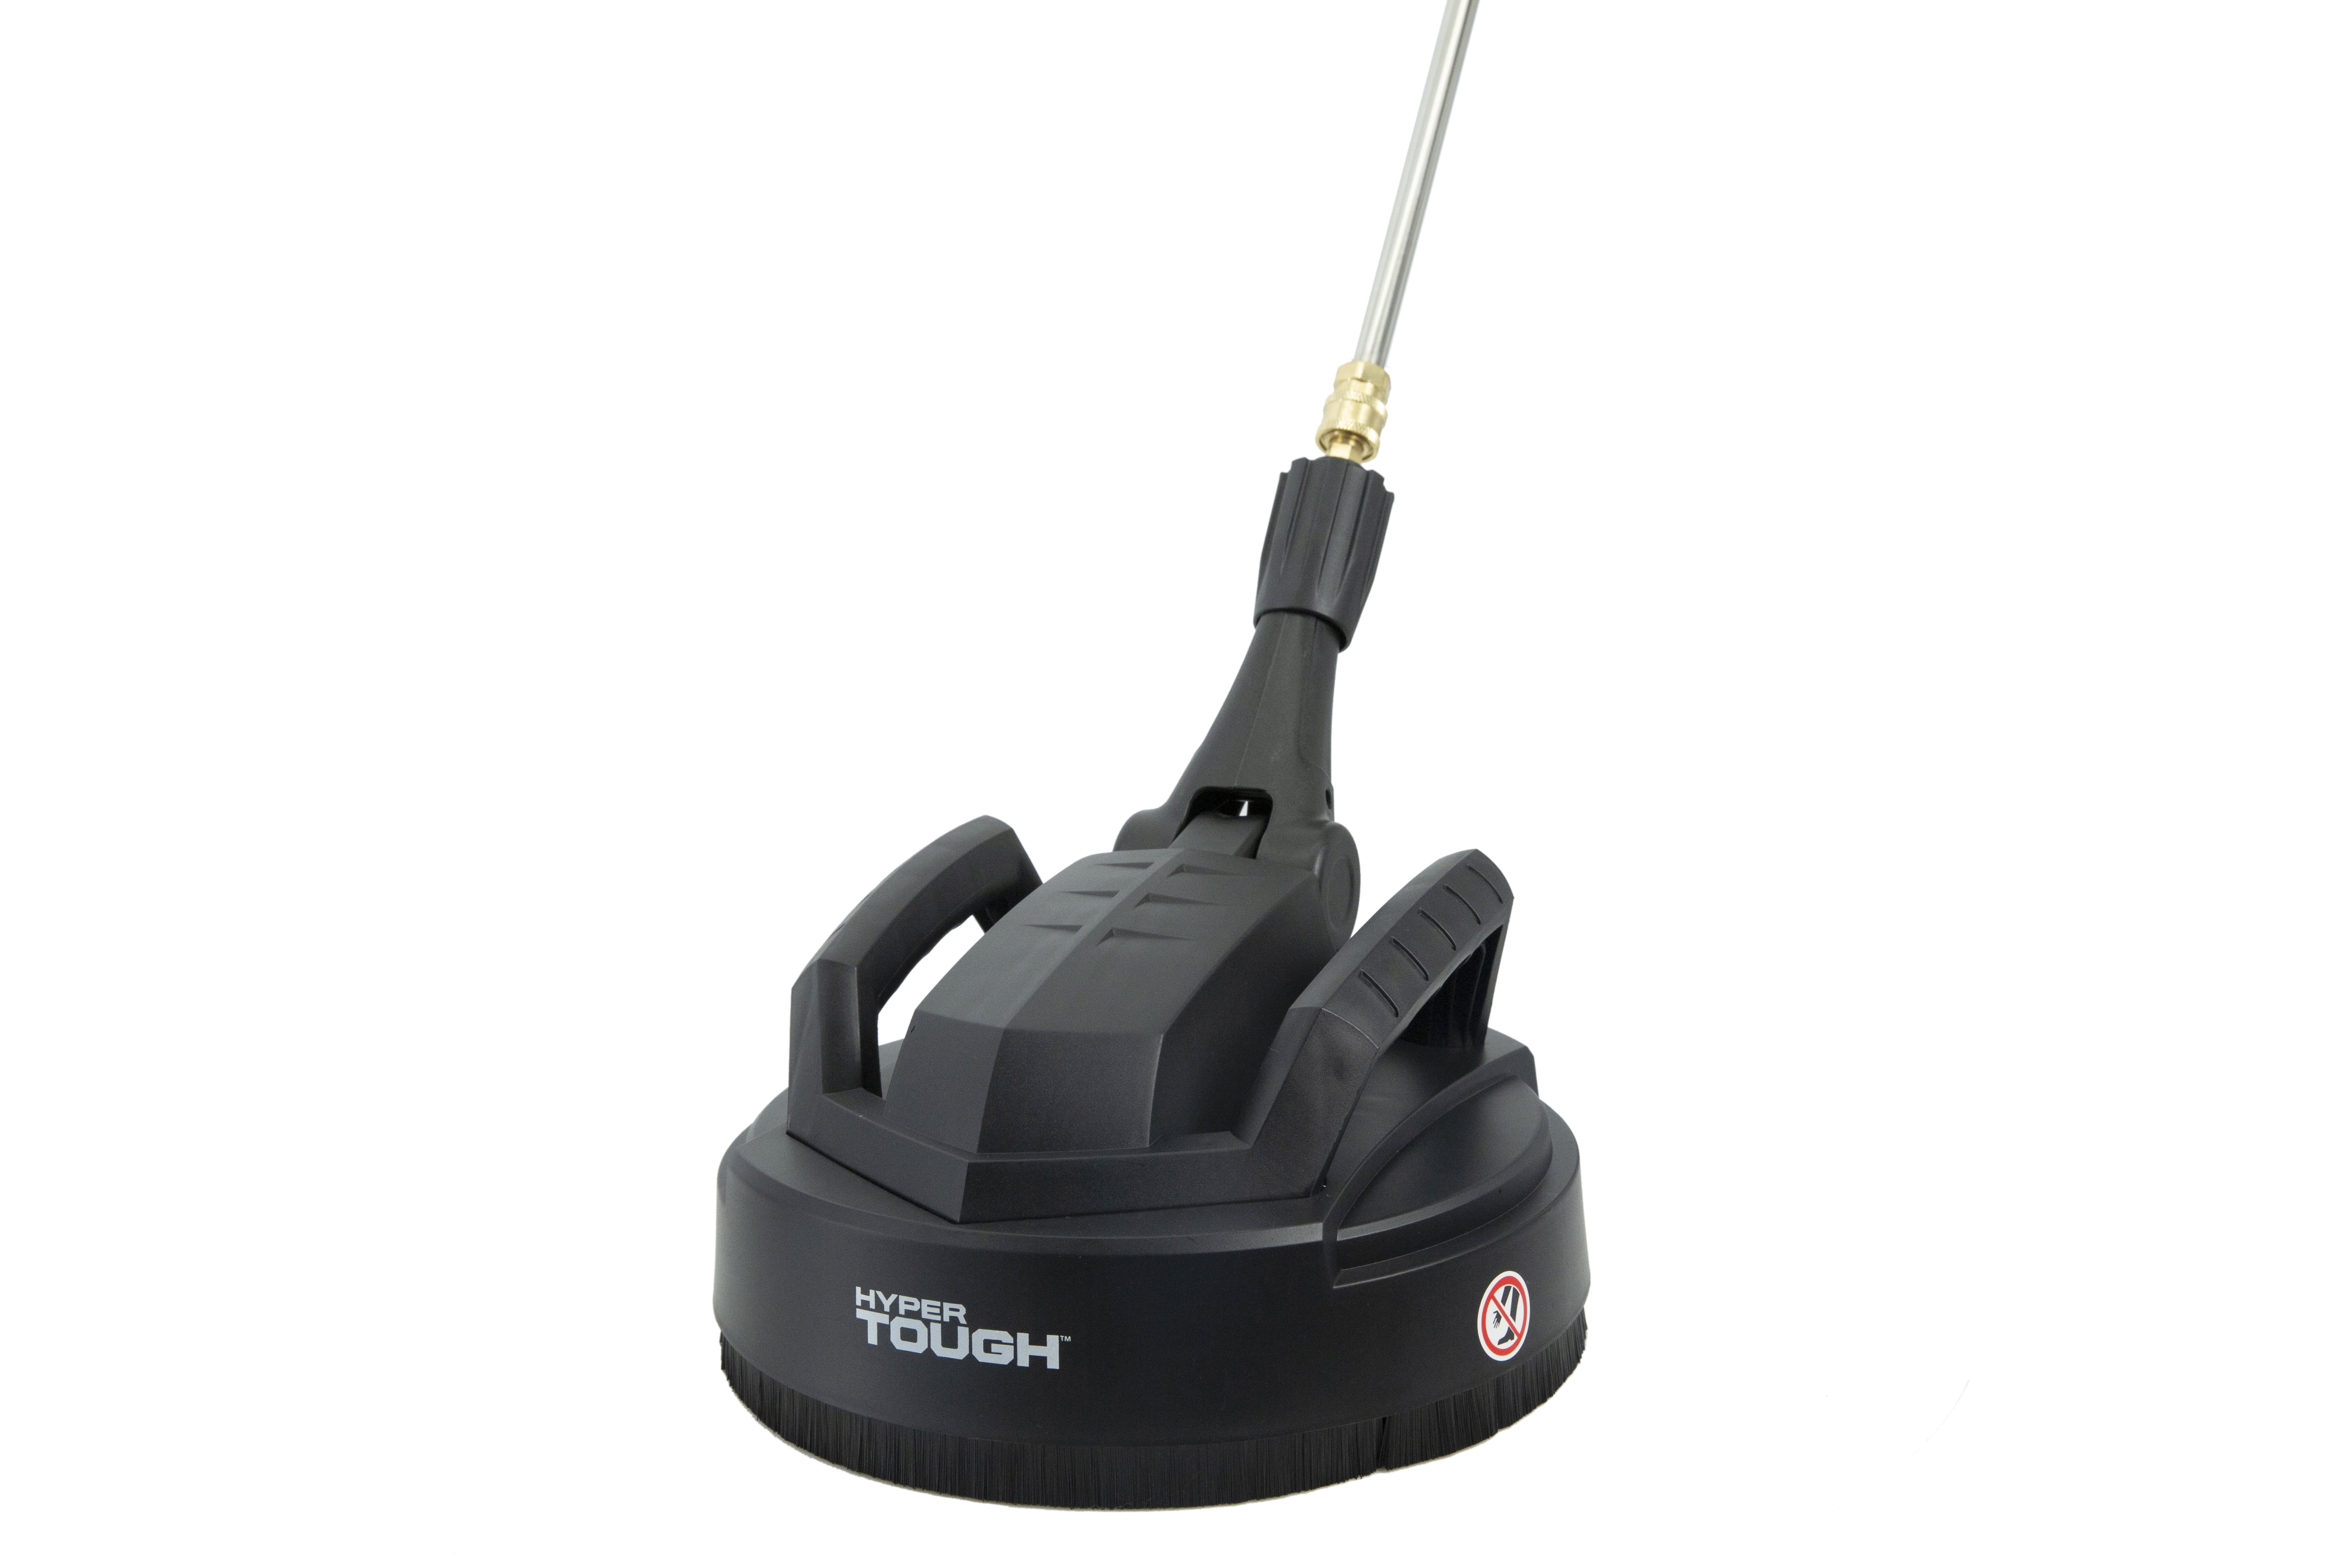 Hyper Tough 11" Surface Cleaner for Pressure Washer, Black